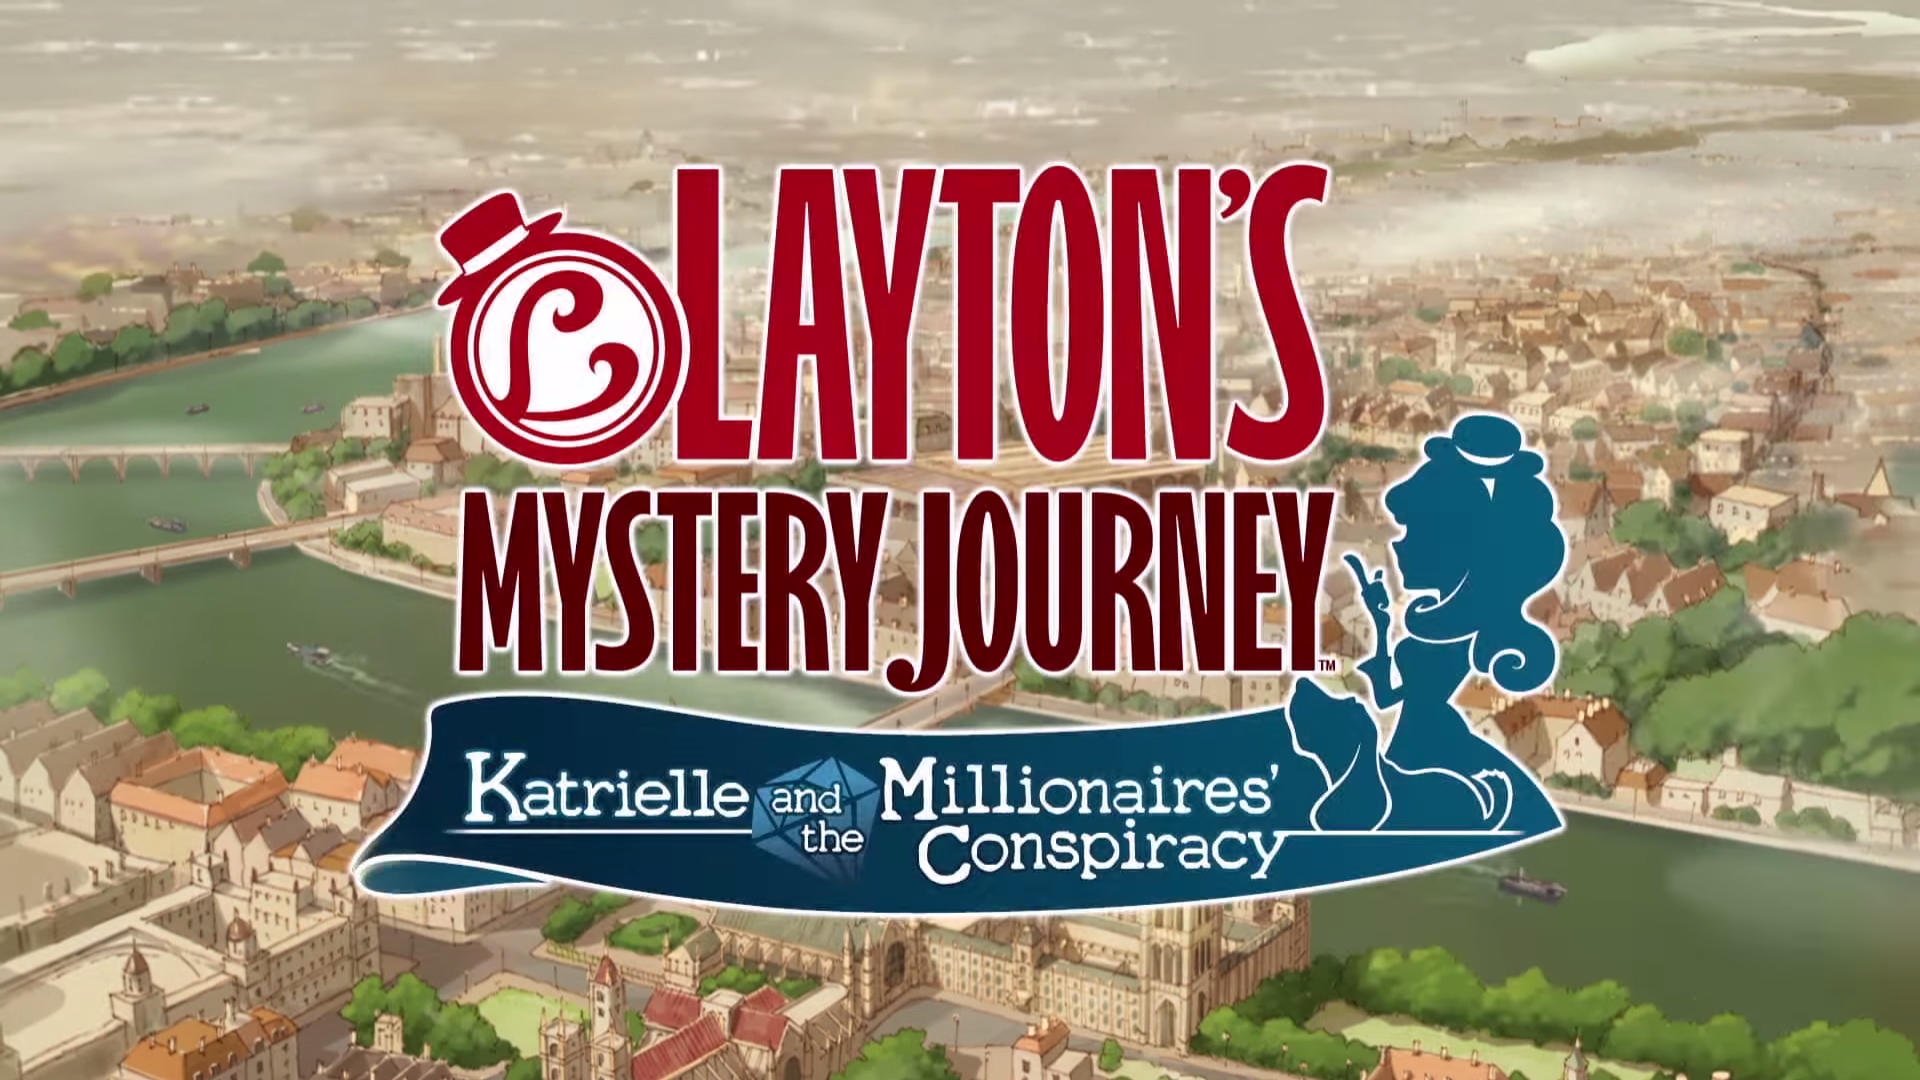 Layton’s Mystery Journey Launches Worldwide on Mobile This Week